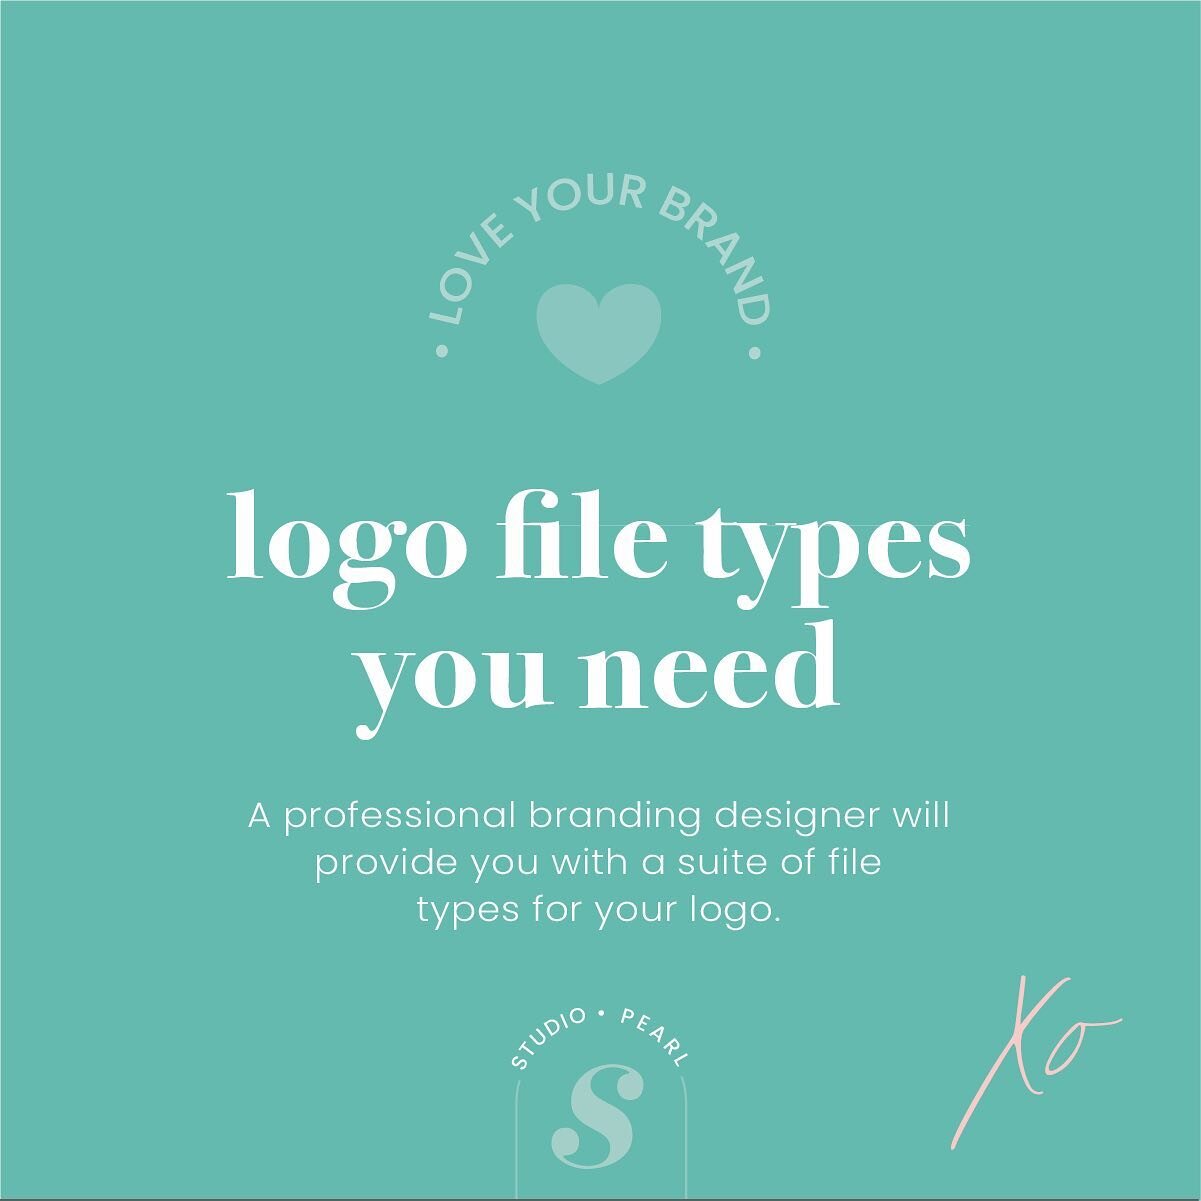 Don&rsquo;t I just need a logo?
Nope, sorry. You need a whole suite of logos, consistently designed and set to industry standards.
Have you ever seen a pixilated logo and cringed? That is why you need to be provided with a set of well labelled logos,